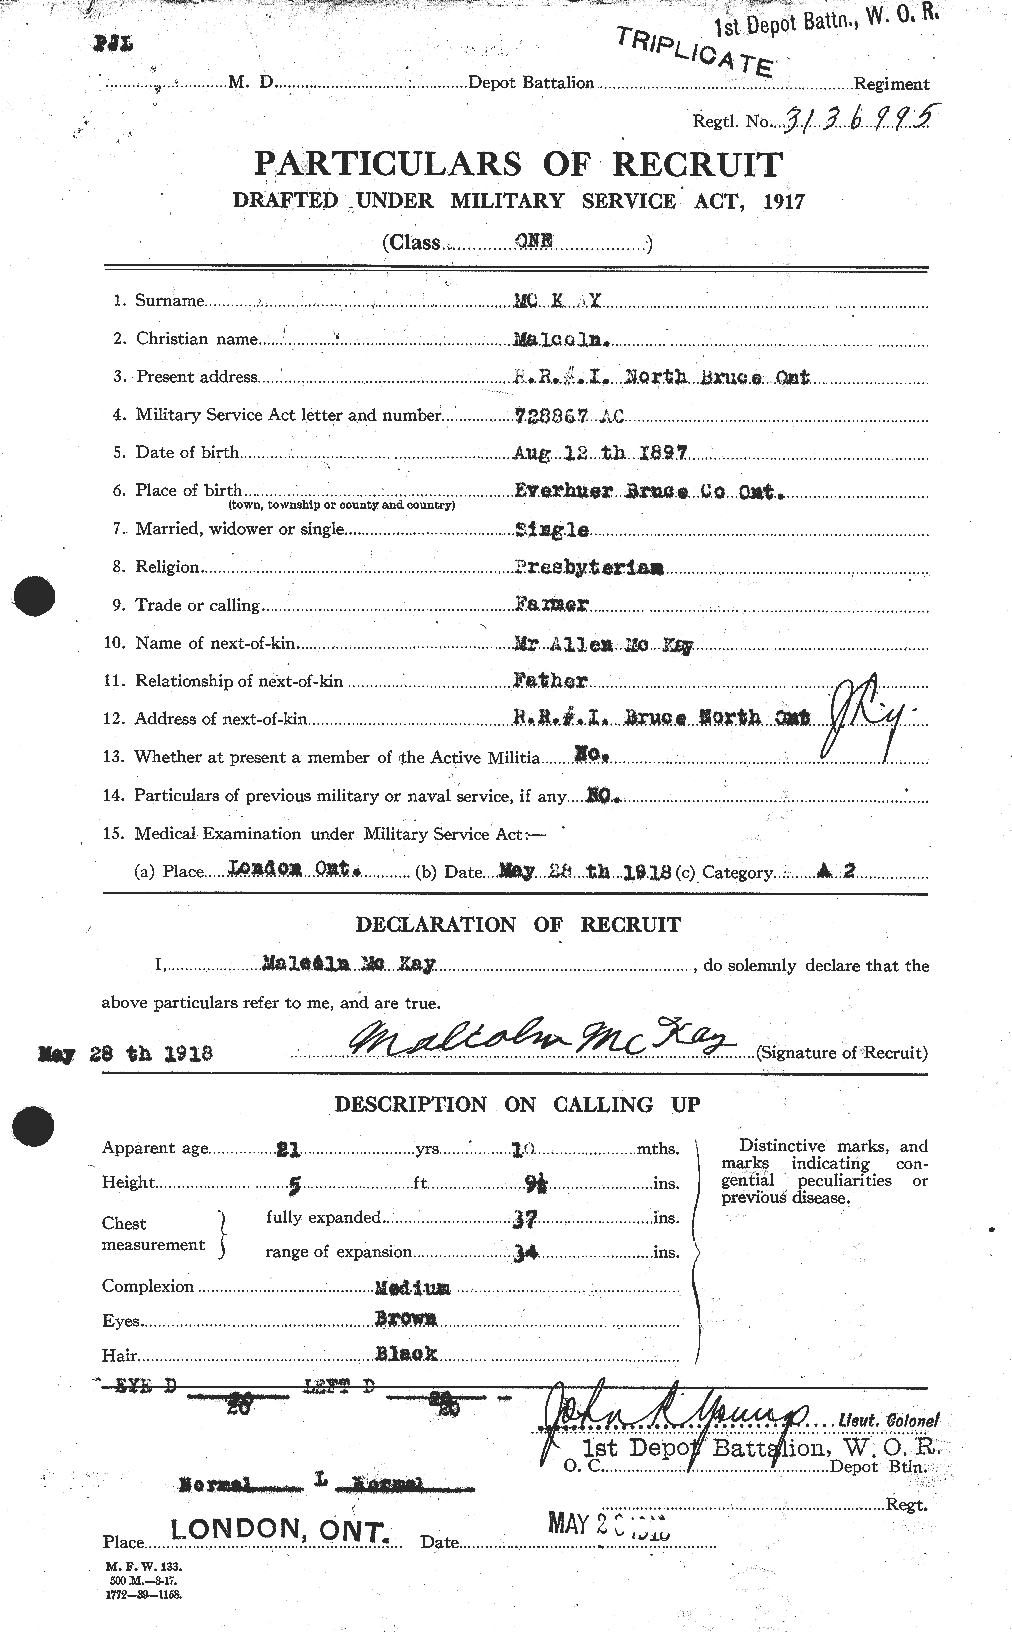 Personnel Records of the First World War - CEF 527161a